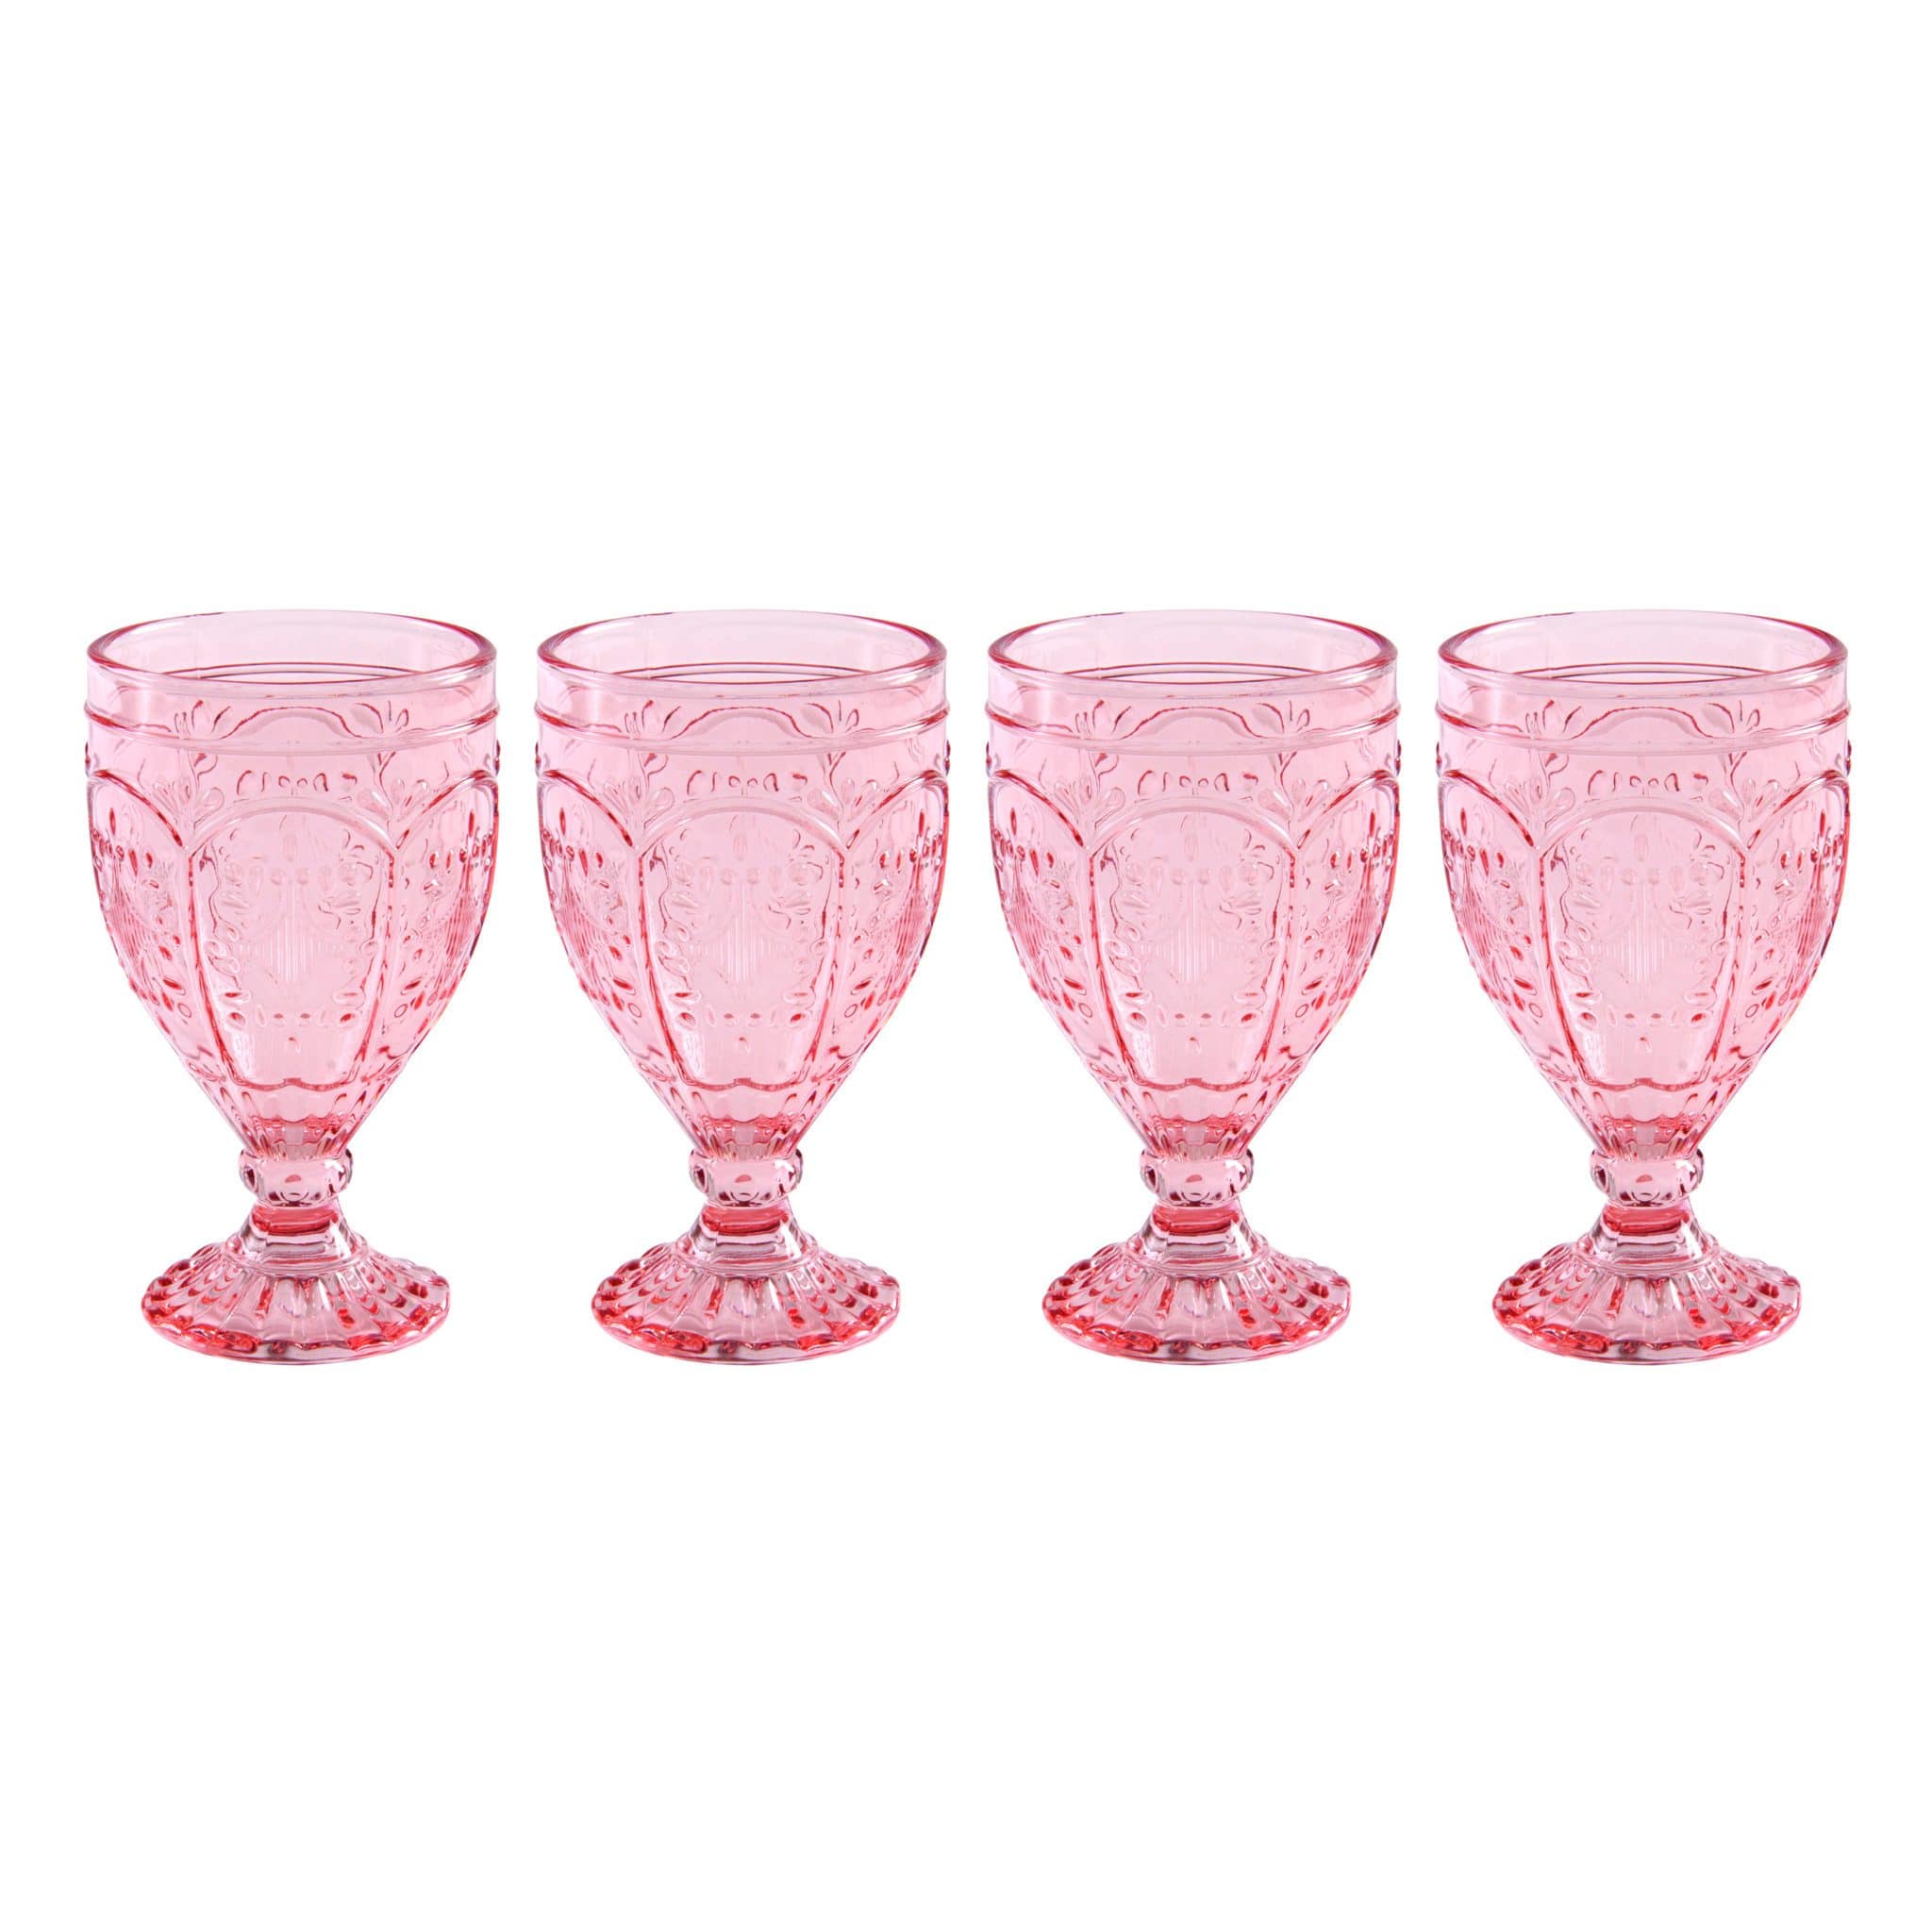 Fitz and Floyd Beaded Wine Goblets - Set of 4